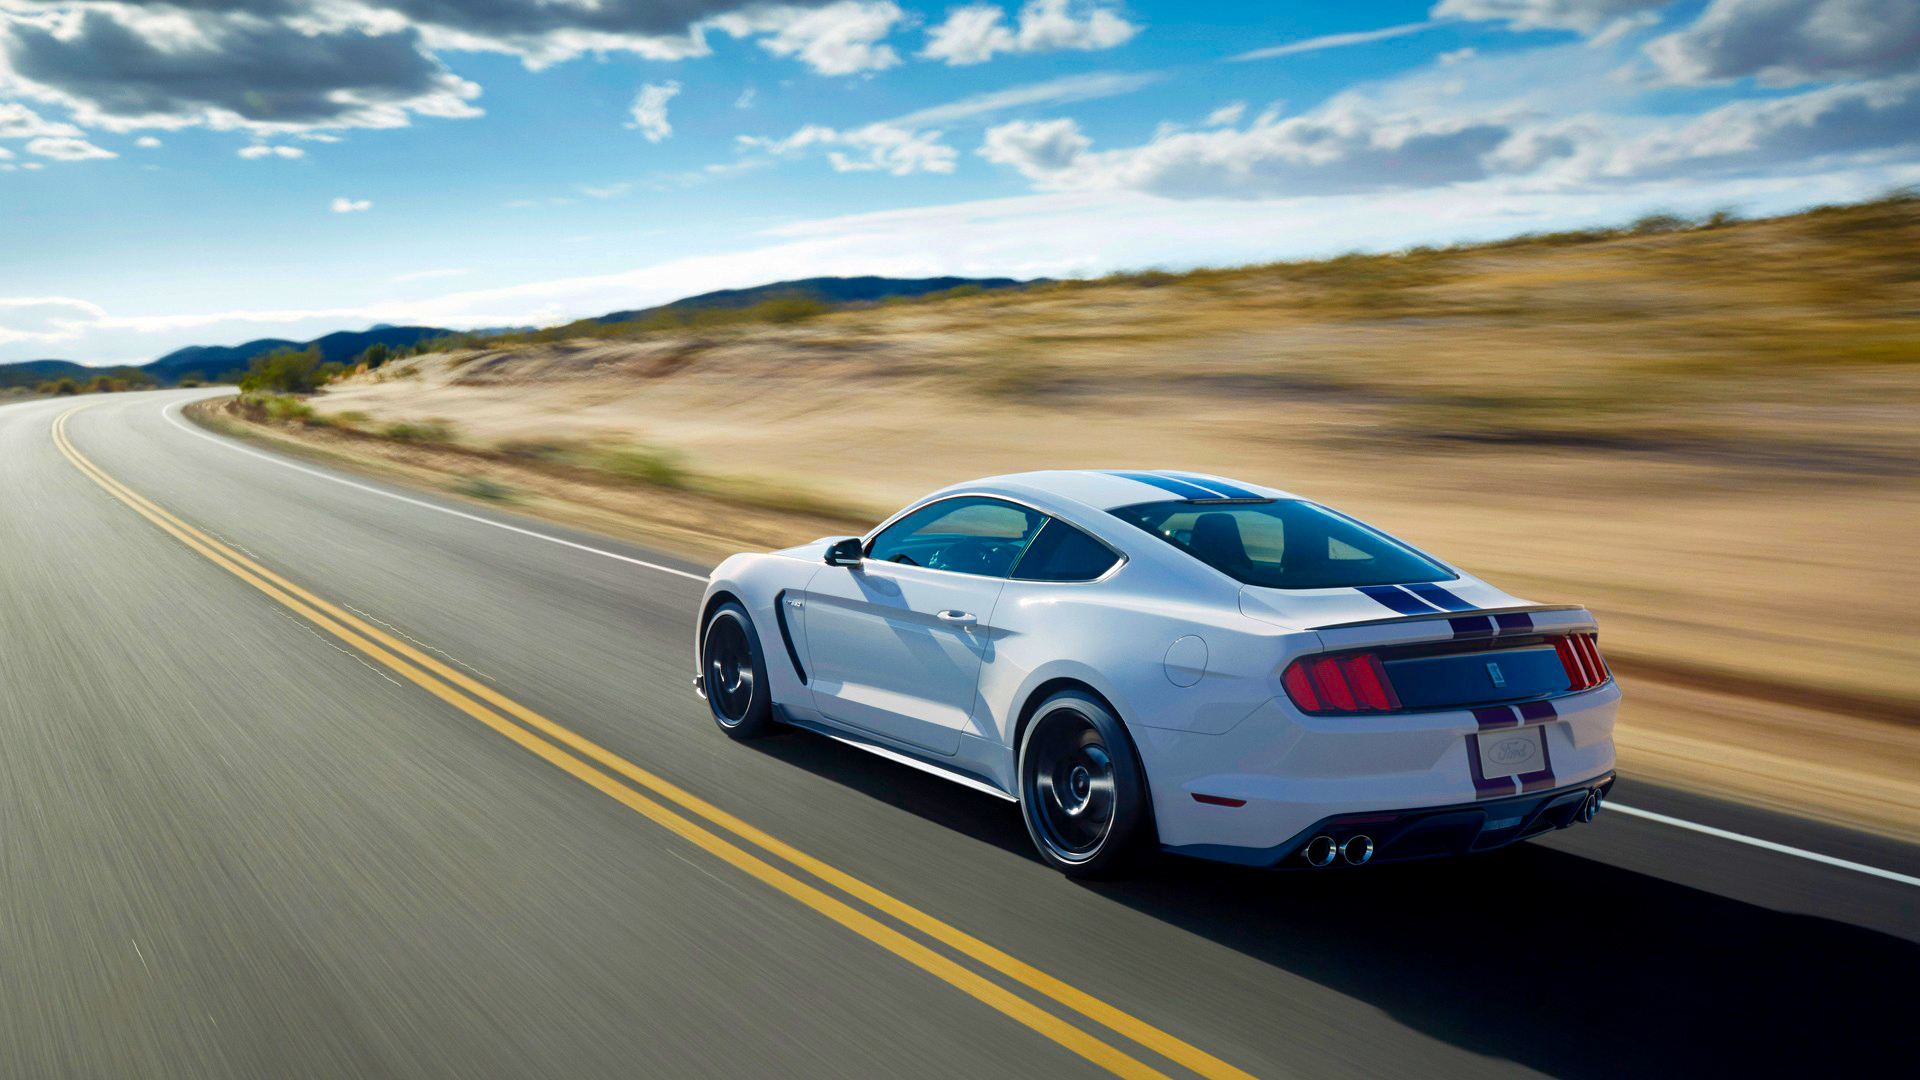 Car Ford Ford Mustang Shelby Gt350 Muscle Car Road Sport Car Vehicle White Car 1920x1080